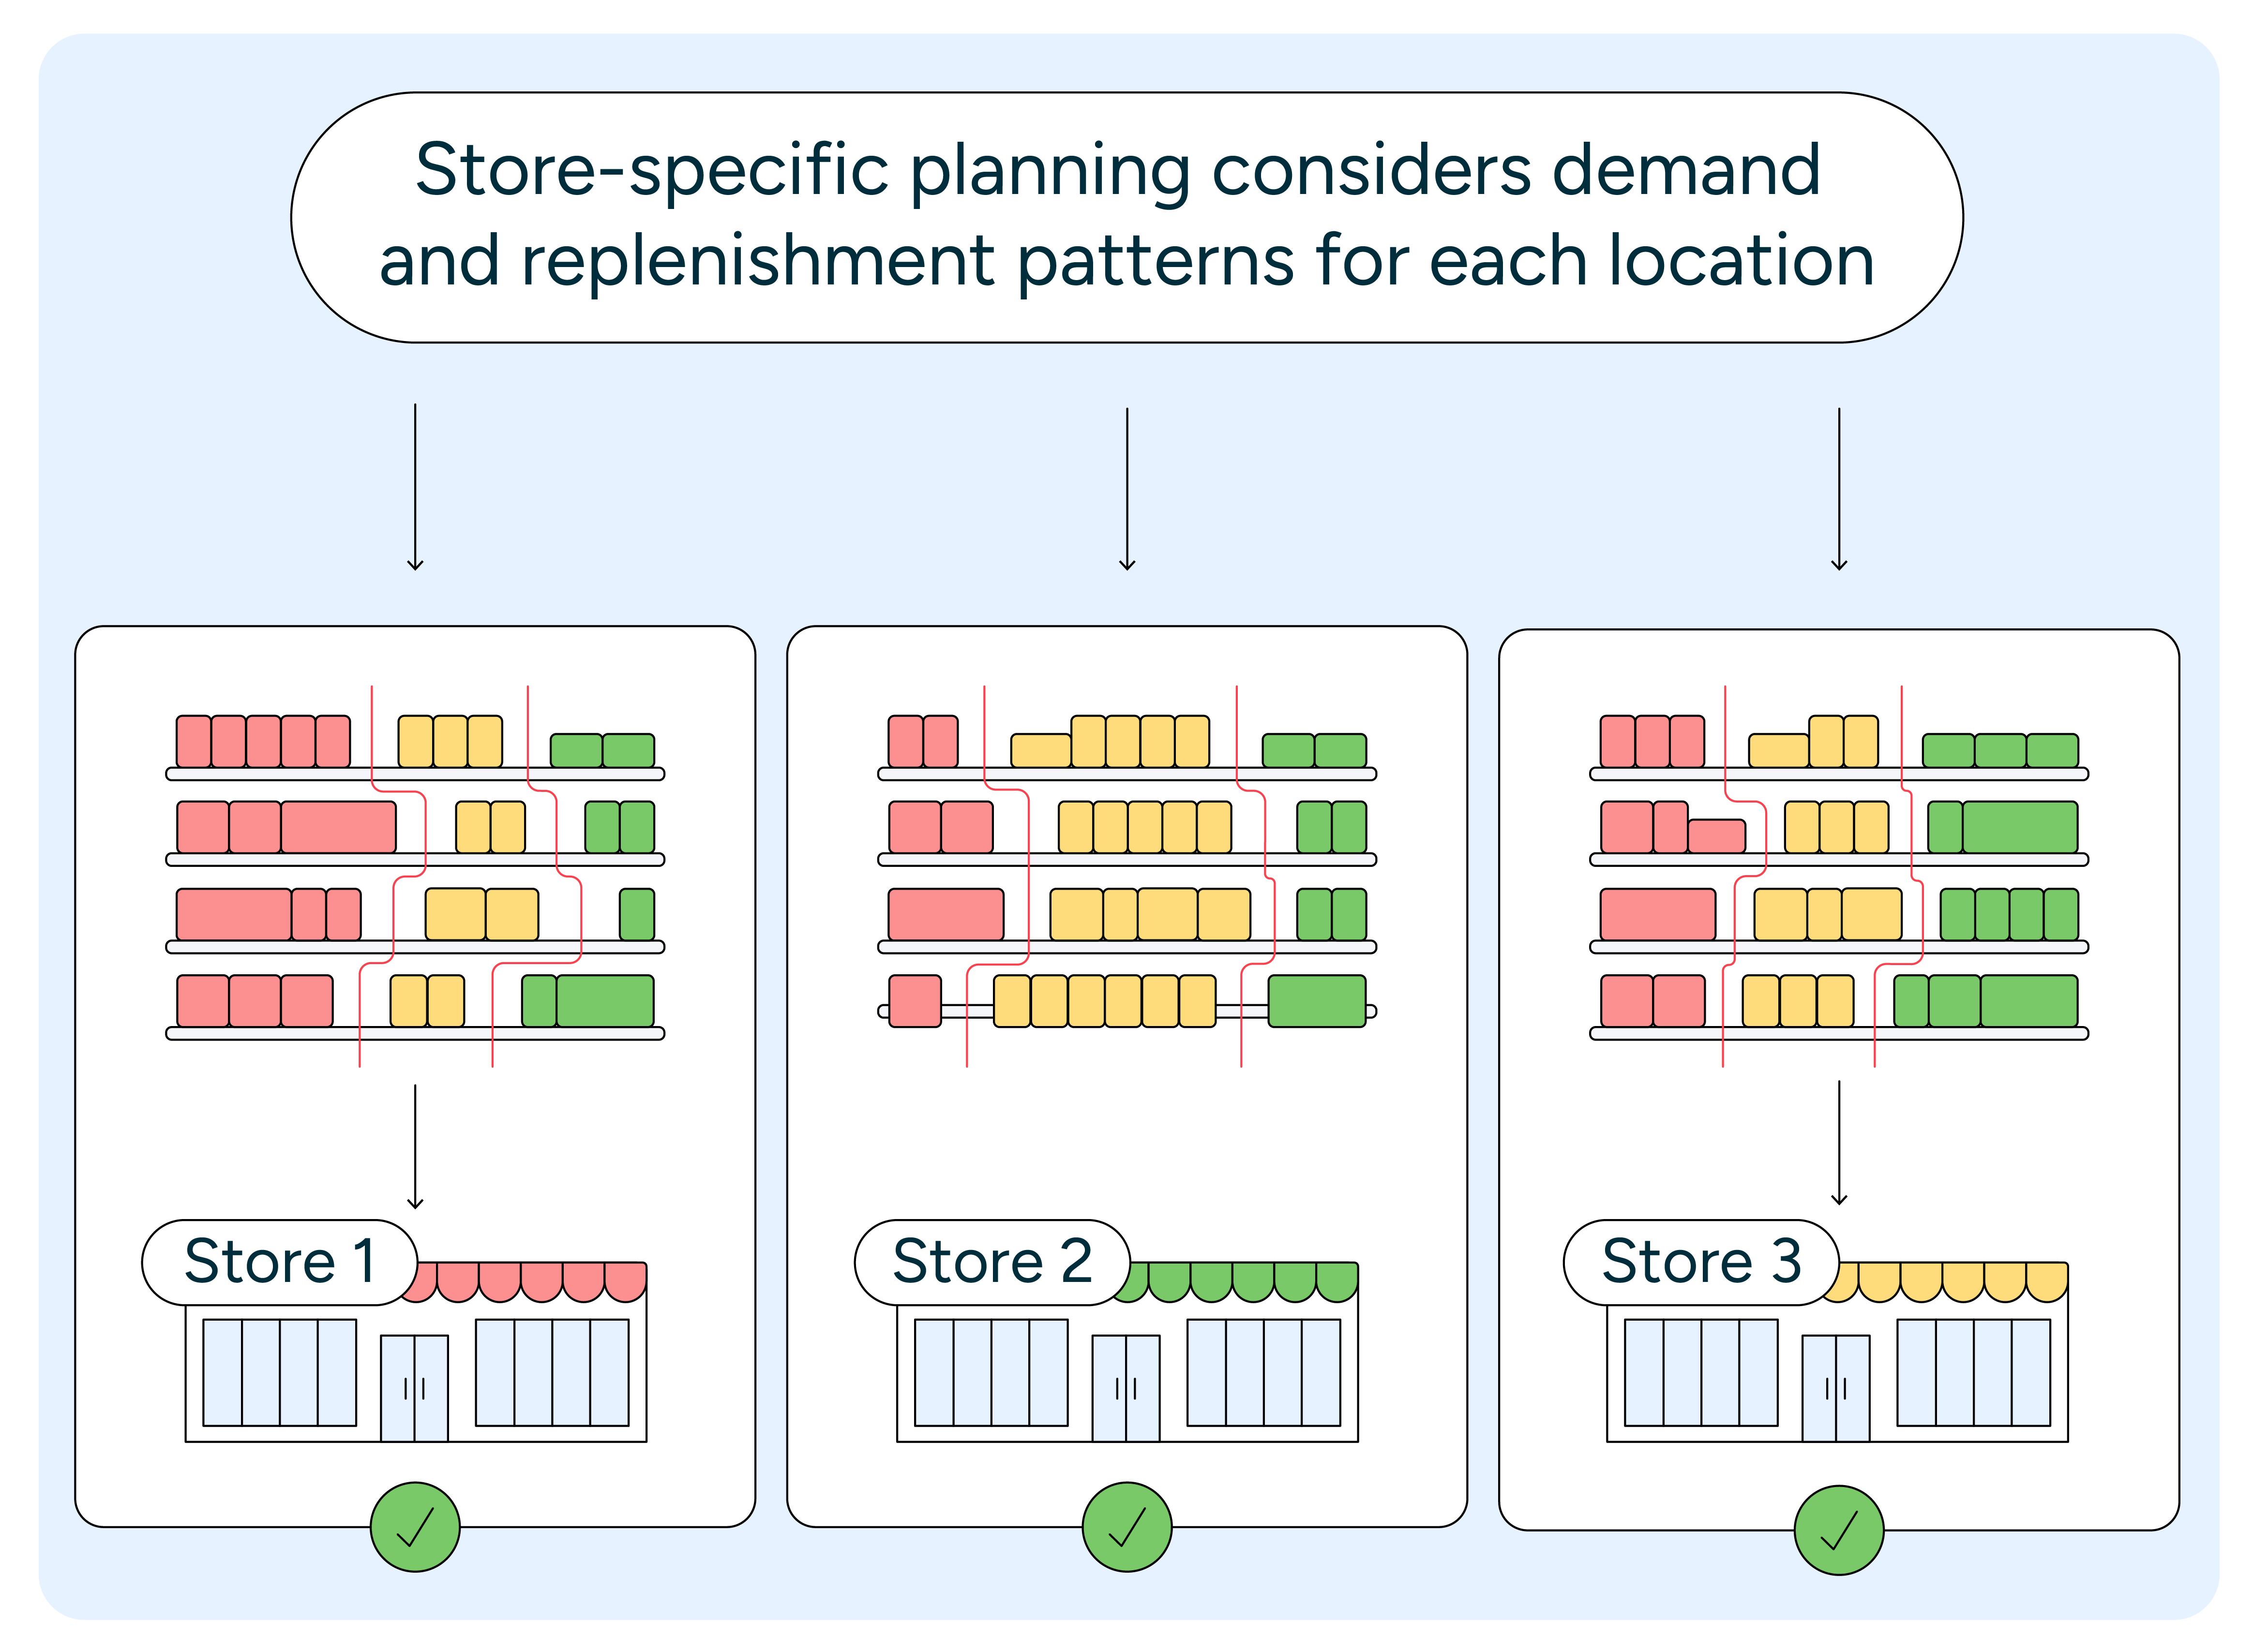 An image illustrating store-specific planning, which allows stores to tailor replenishment to each specific store layout and shelving availability to reduce costs and maximize efficiency.